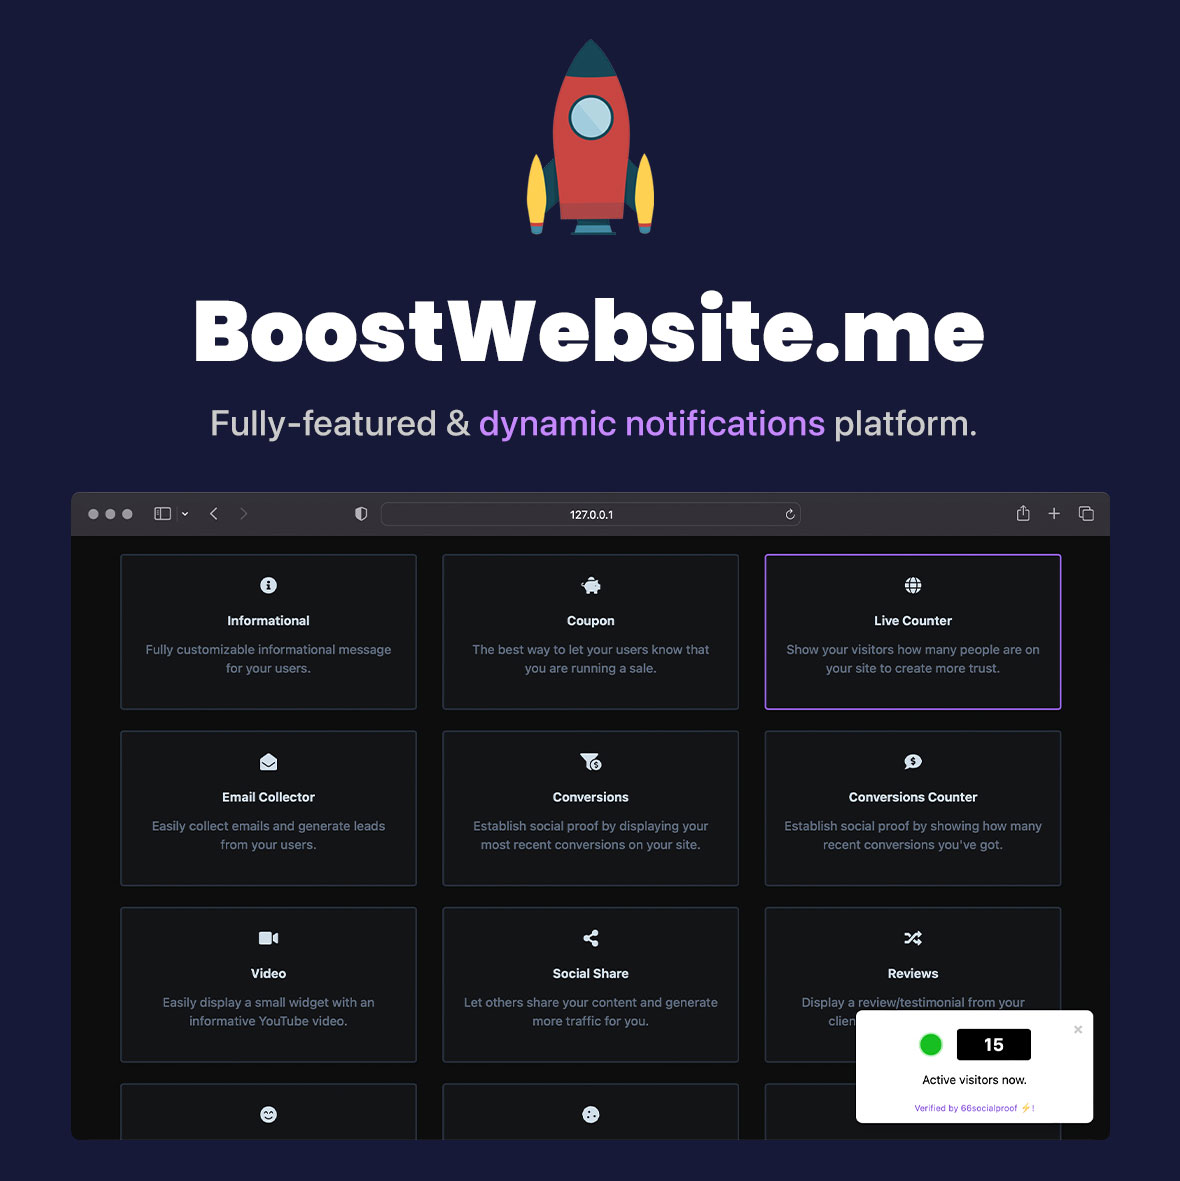 BoostWebsite with FOMO Widgets Notifications and Social Proof